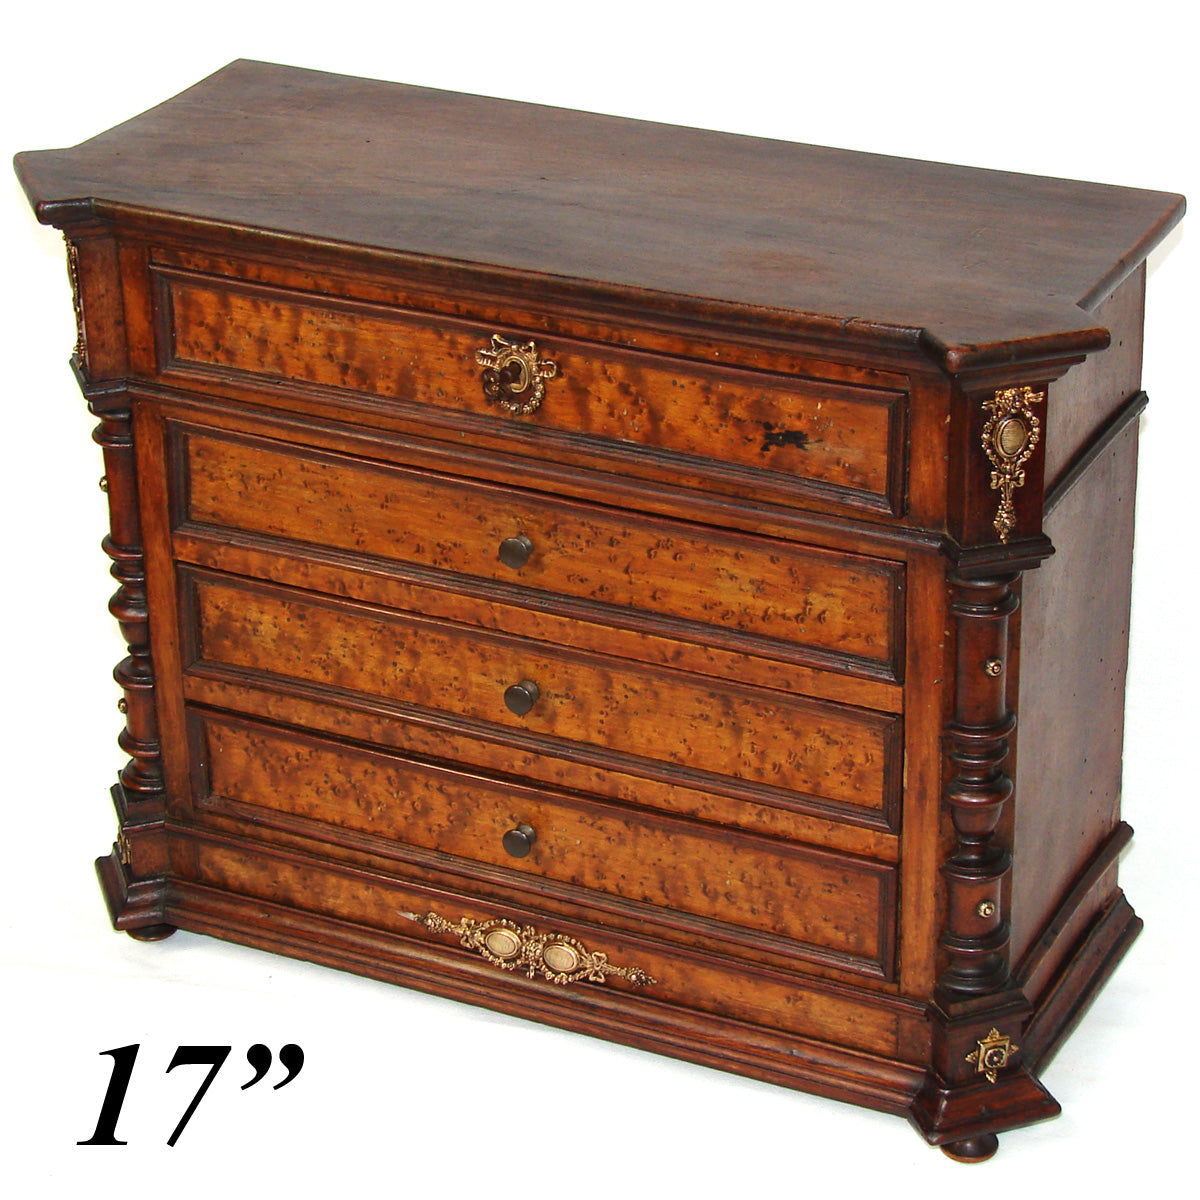 Rare Antique French Napoleon III 17" Ebaniste Apprentice or Doll Sized Miniature Chest of Drawers, Burled